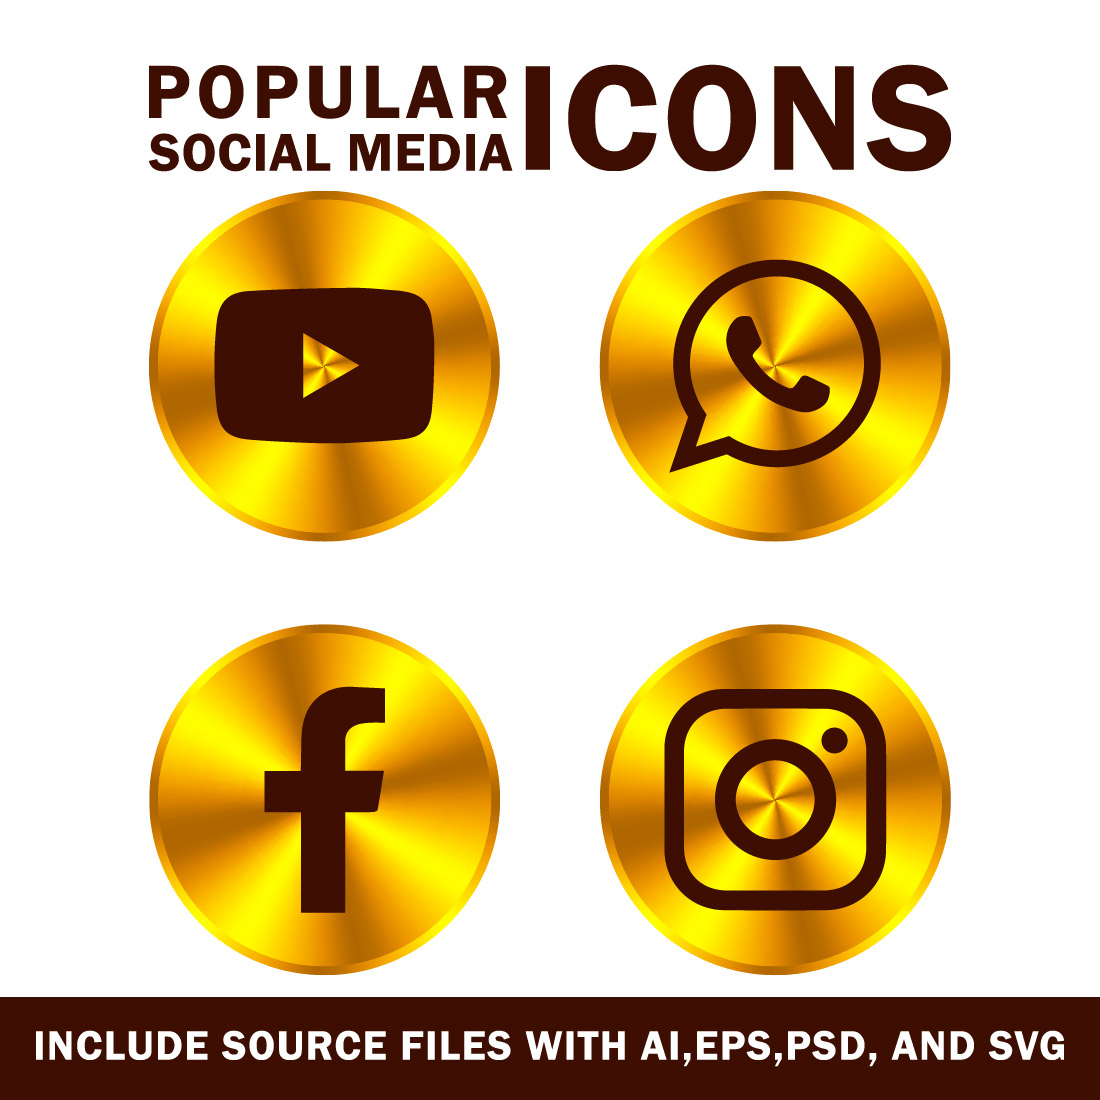 Golden icons for the most popular social media.